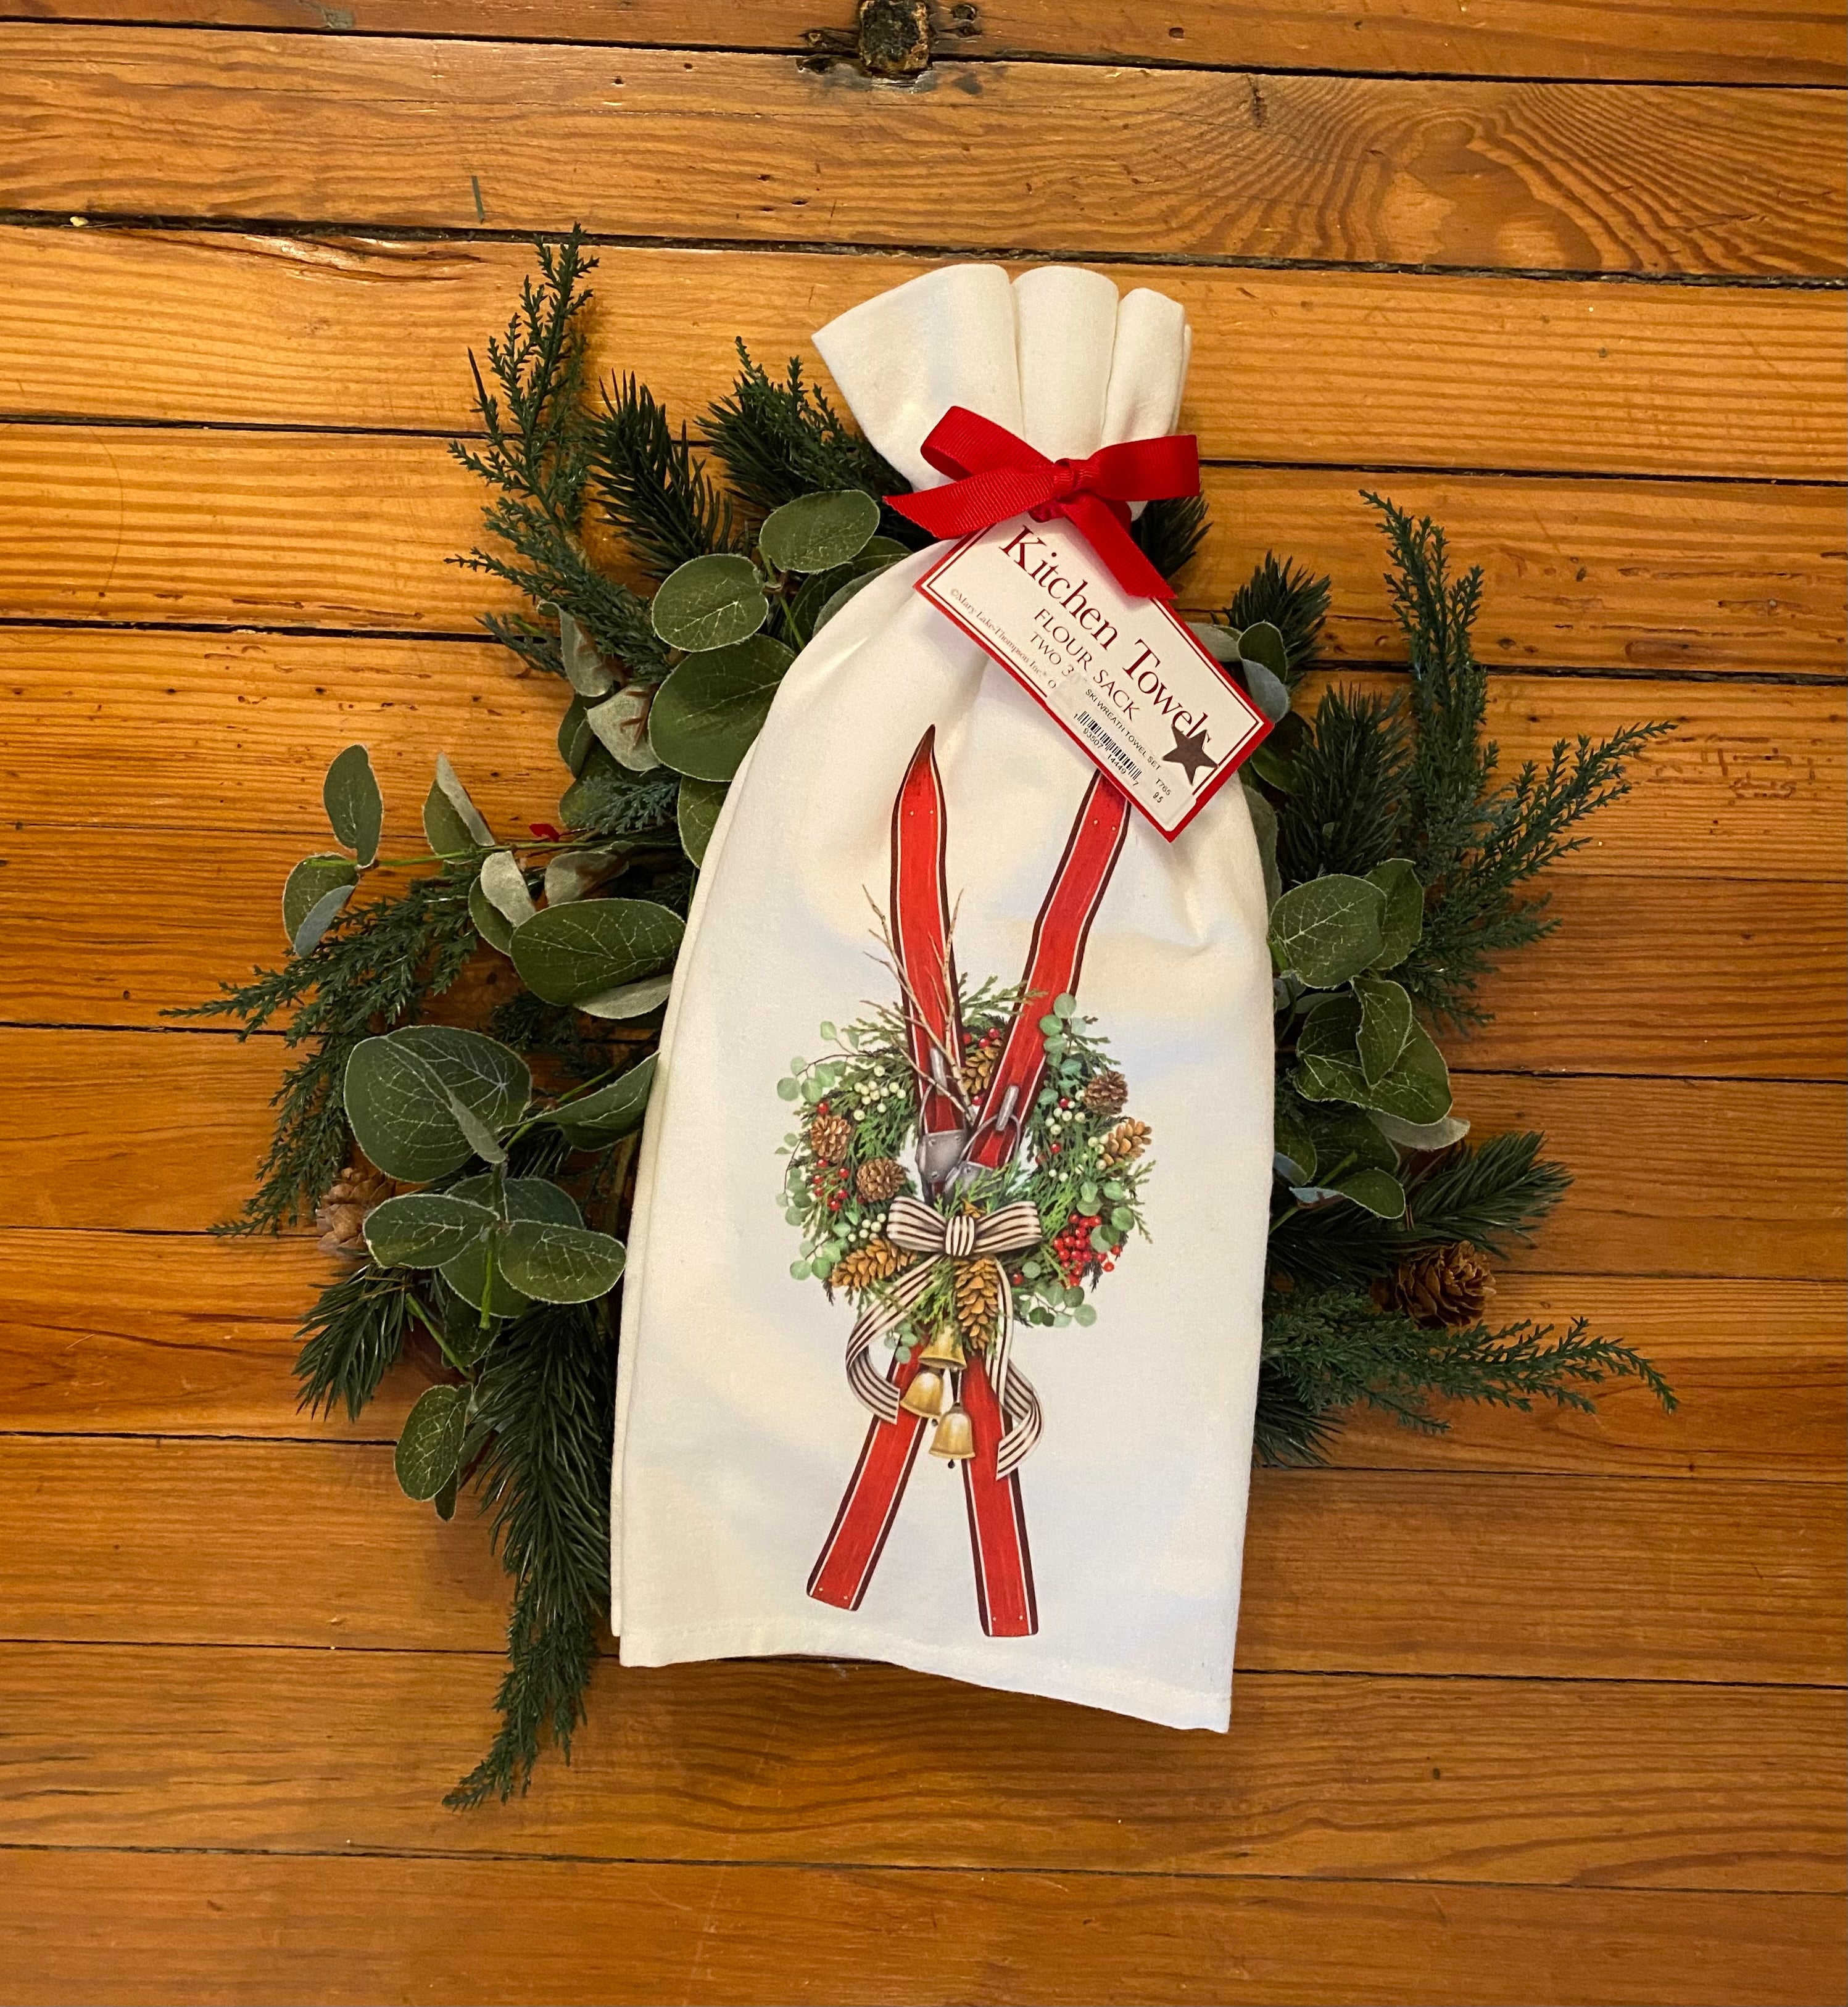 A lovely pair of seasonal flour sack towels. The design is a pair of red skis intermixed in a pinecone wreath. A festive way to dress up your home!  Two hand folded flour sack towels tied with a matching bow and hang tag 100% cotton, 30"x30"